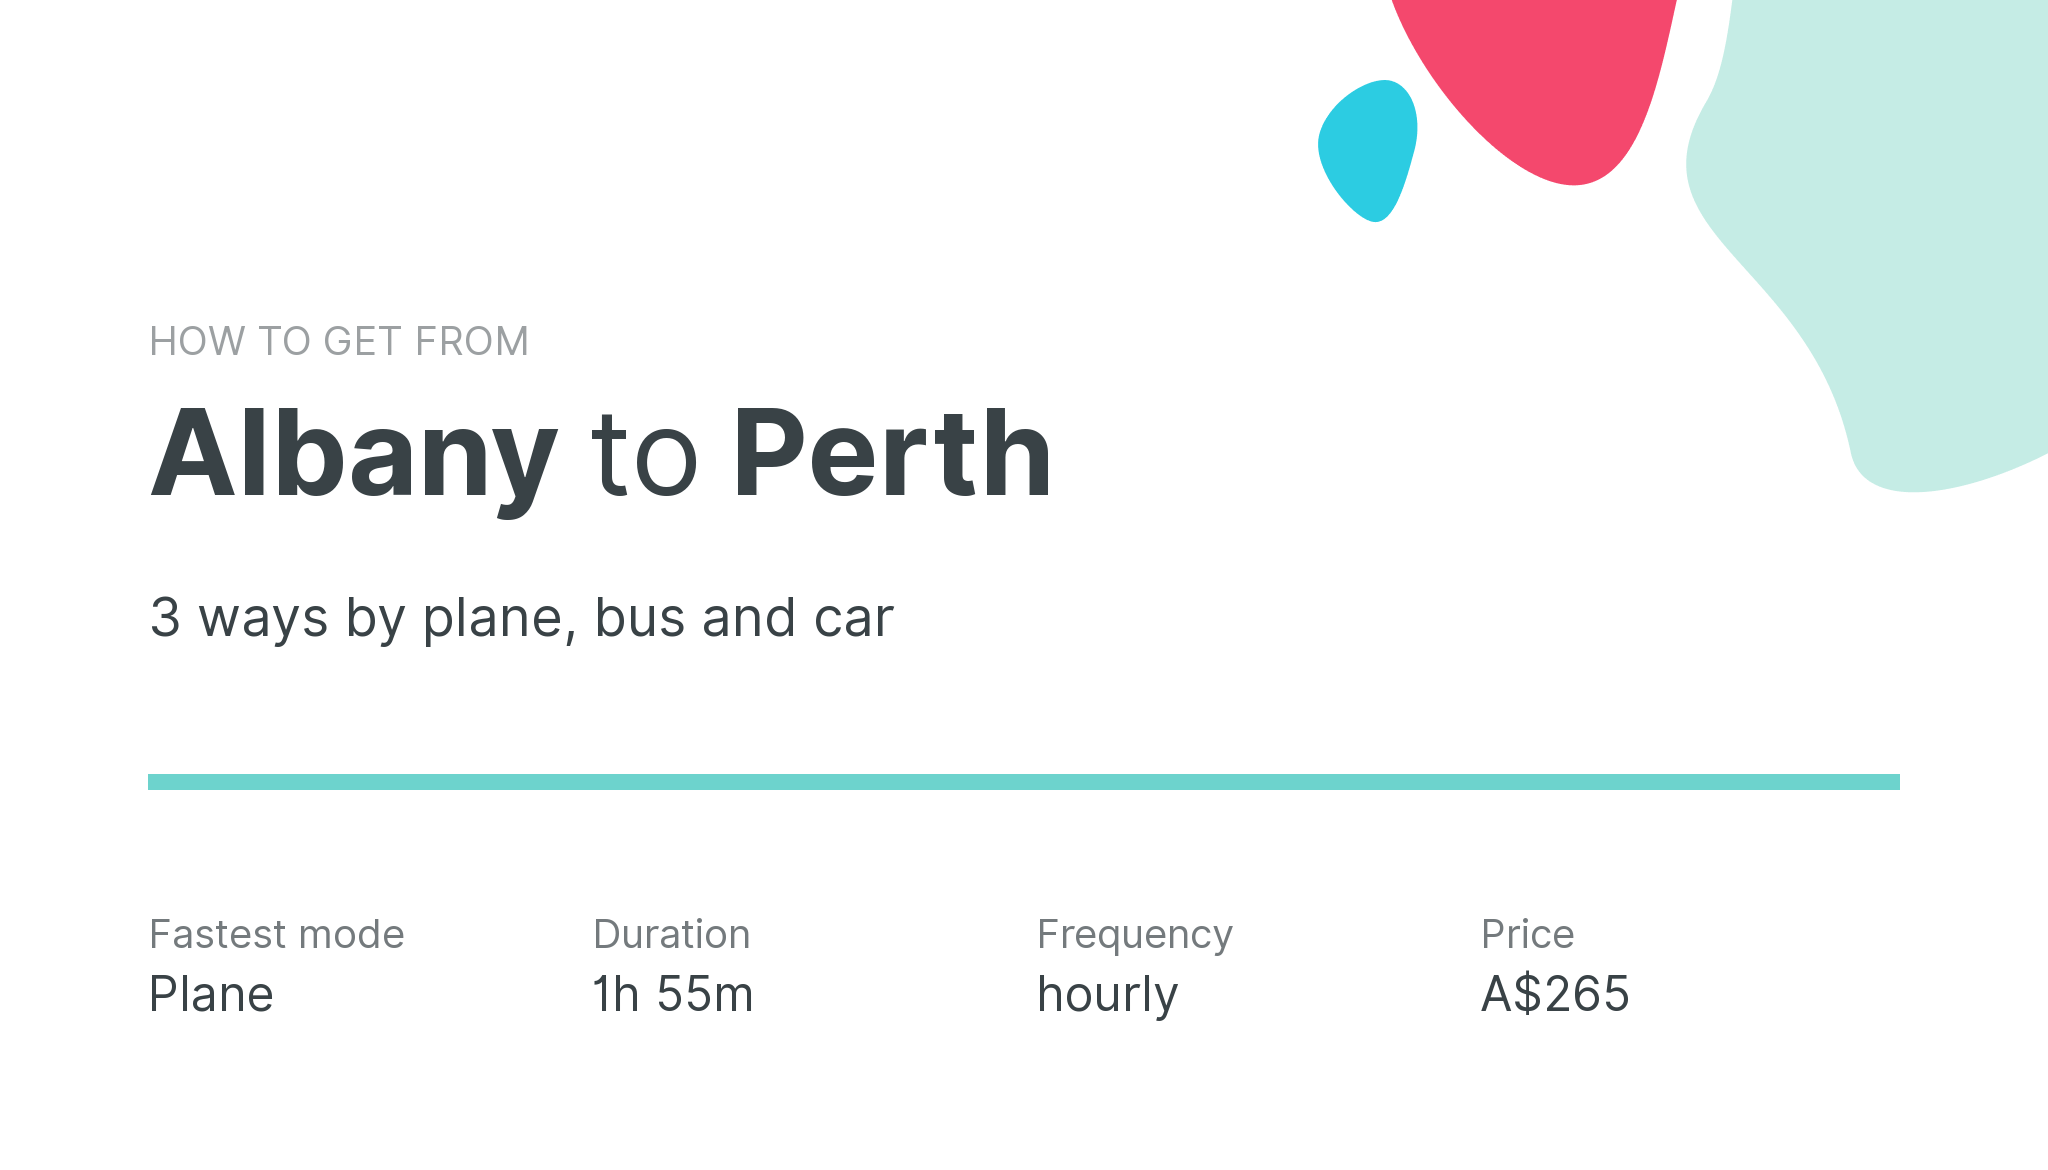 How do I get from Albany to Perth